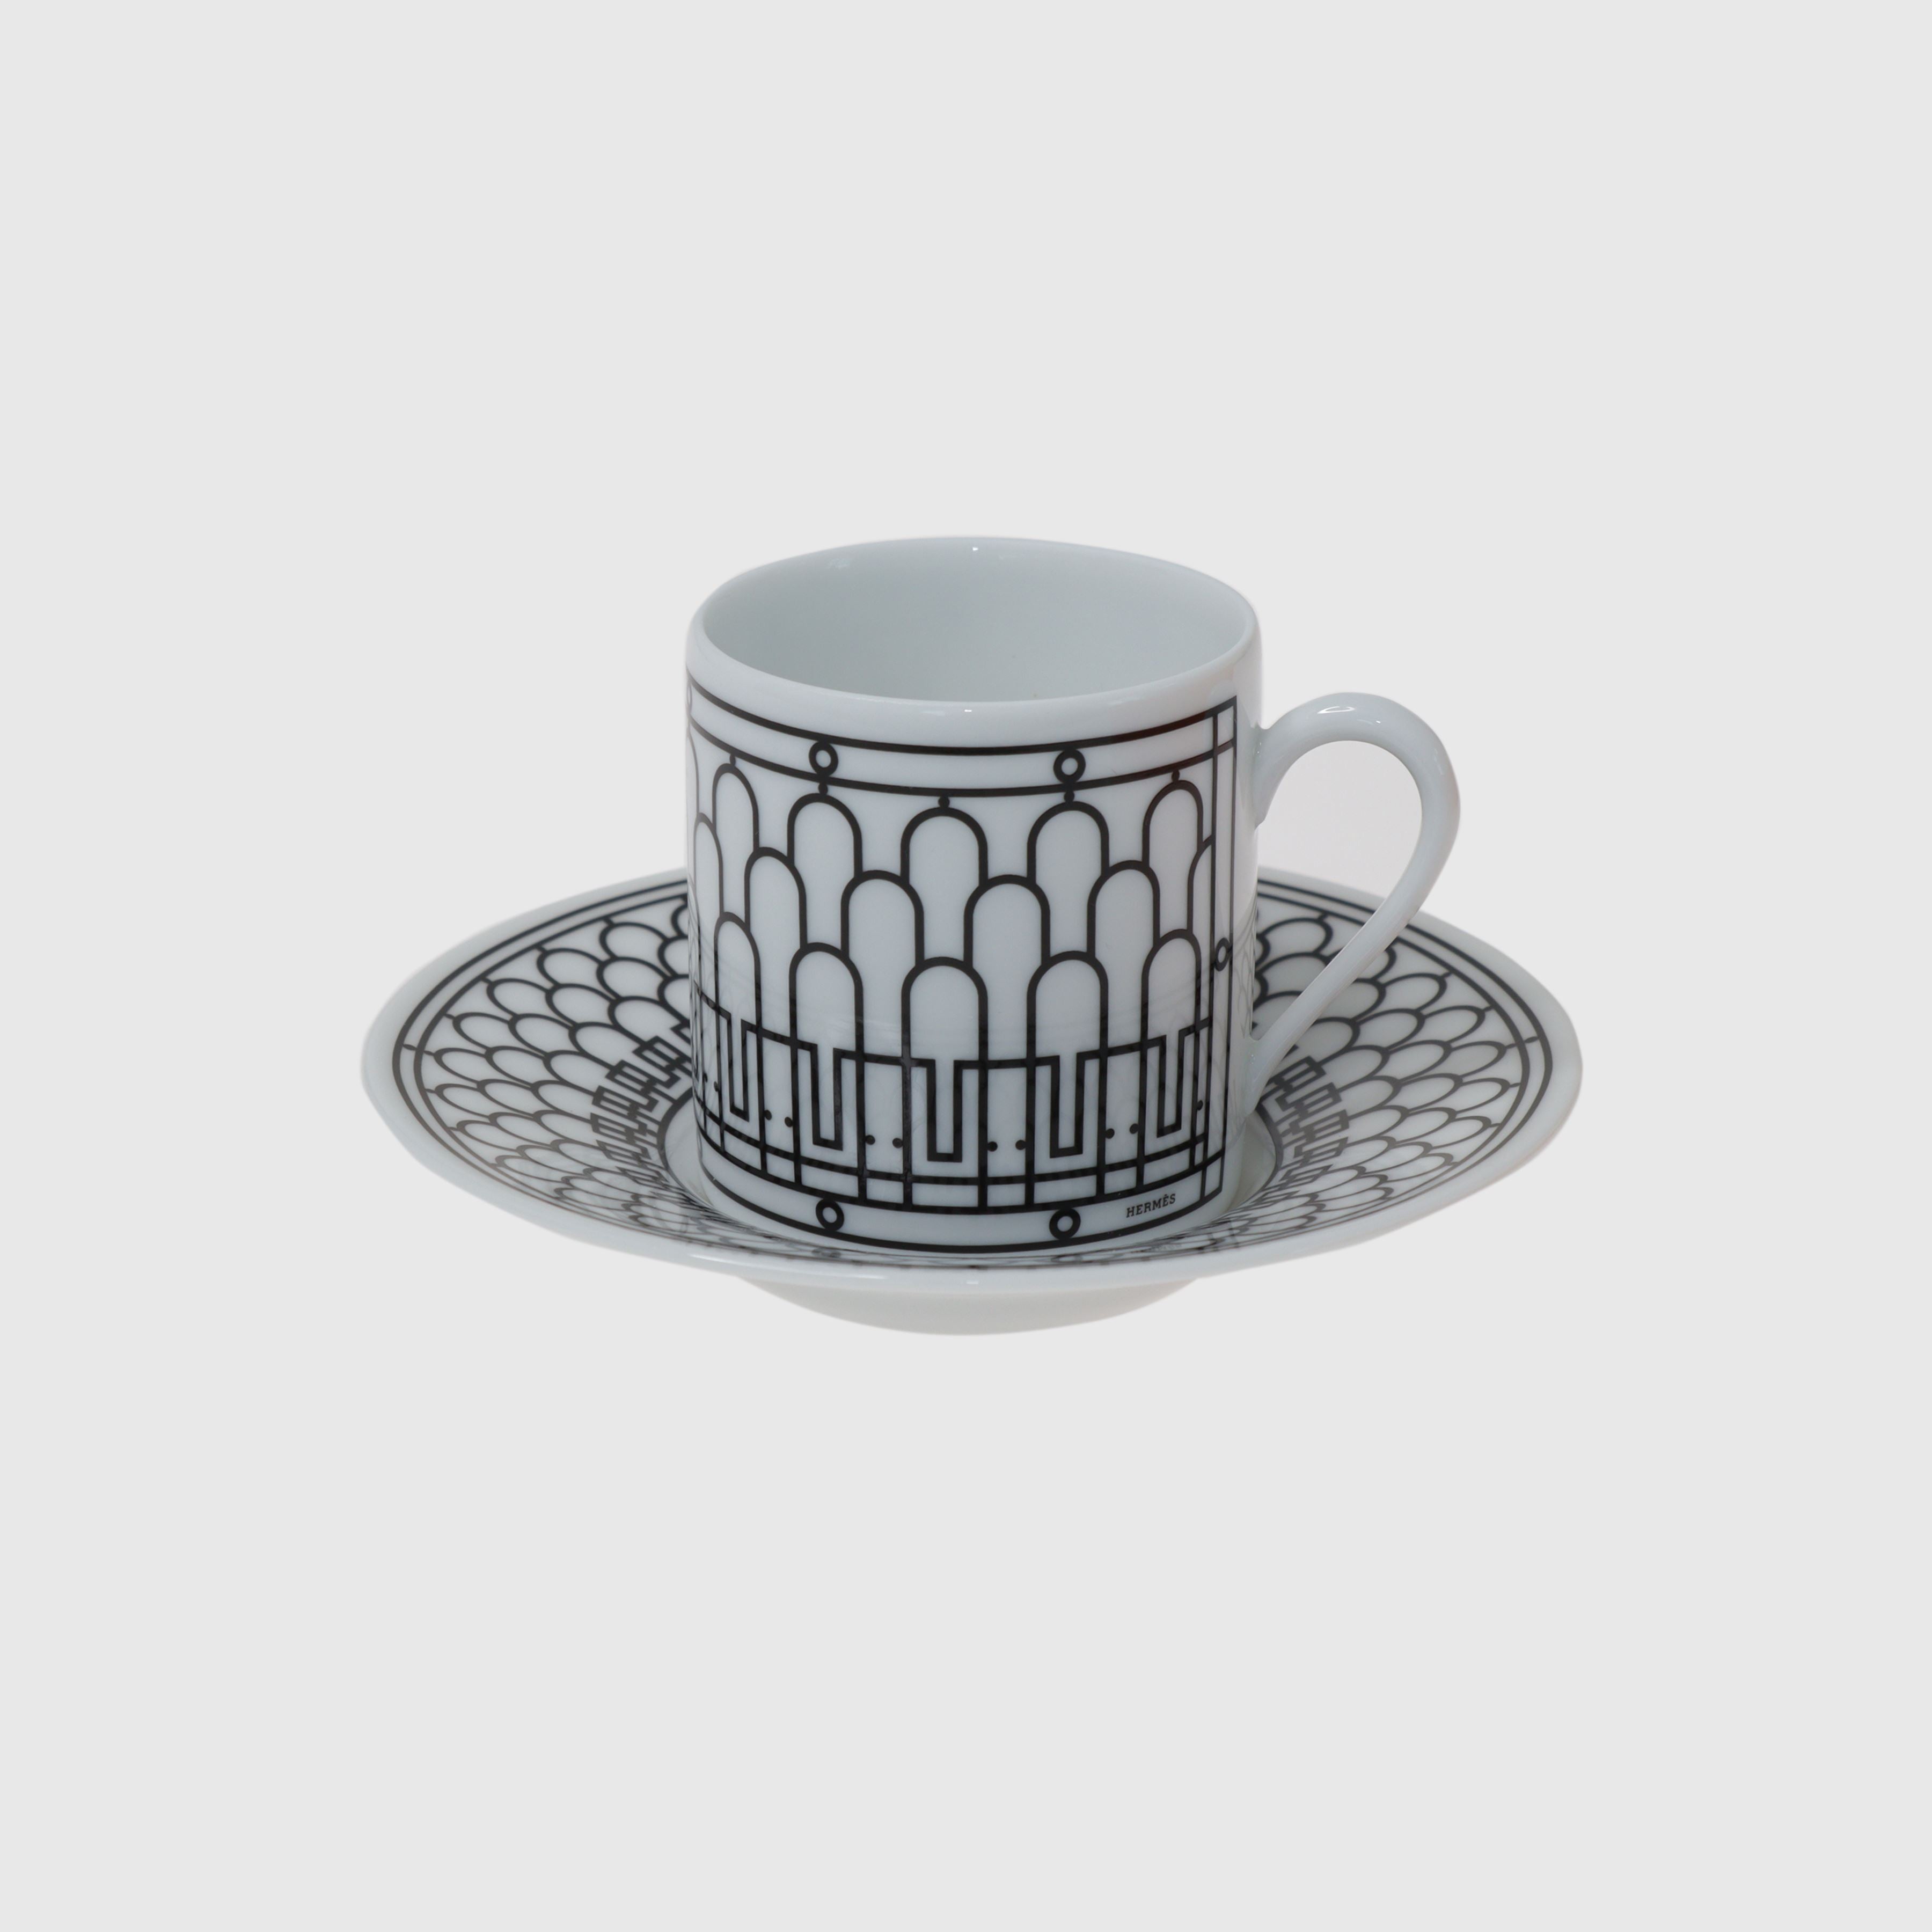 H Deco Tea-Cup And Saucer Set Accessories Hermes 